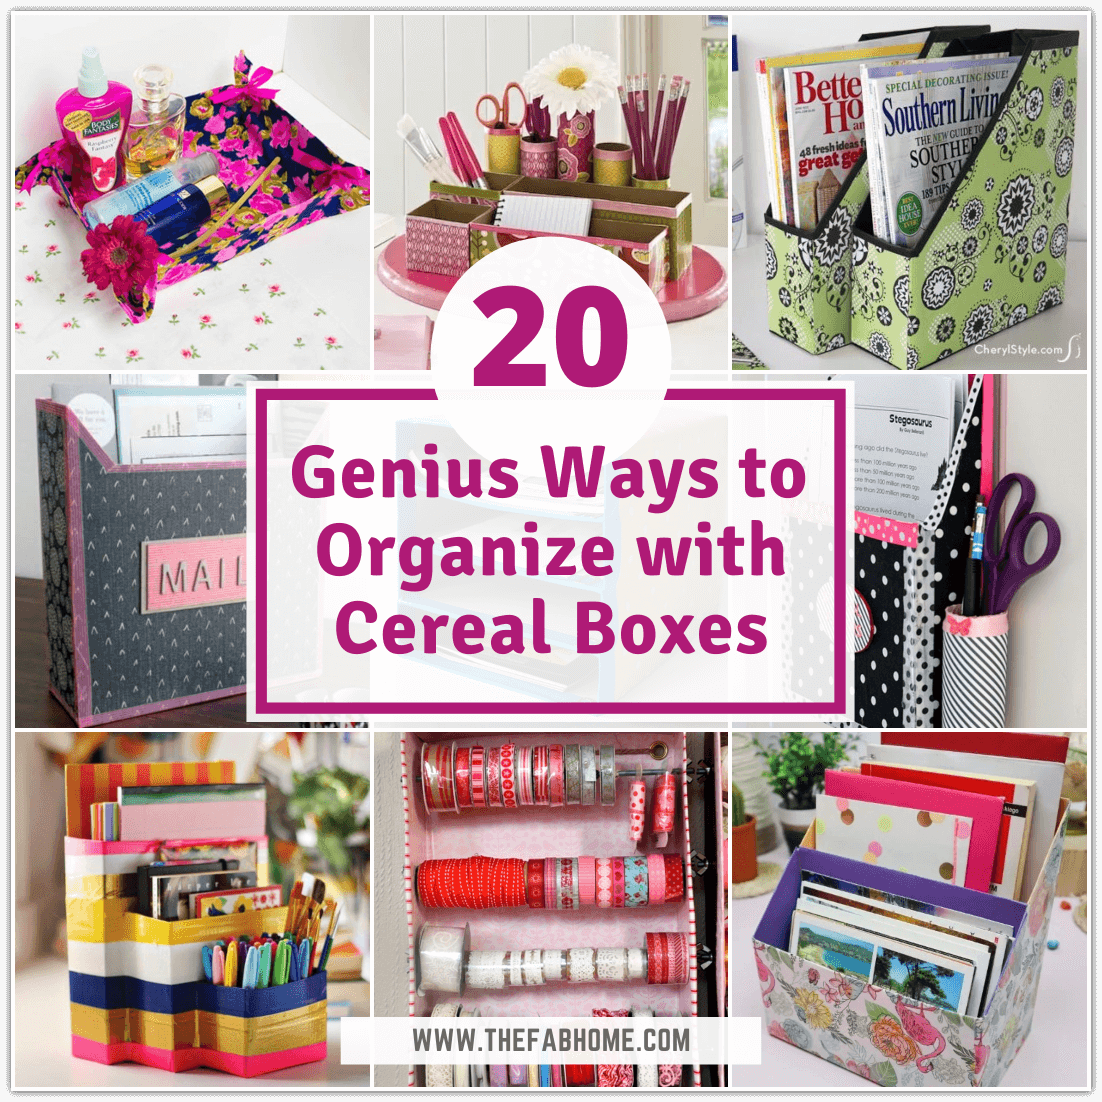 https://thefabhome.com/wp-content/uploads/2021/06/Genius-Ways-to-Organize-with-Cereal-Boxes.png